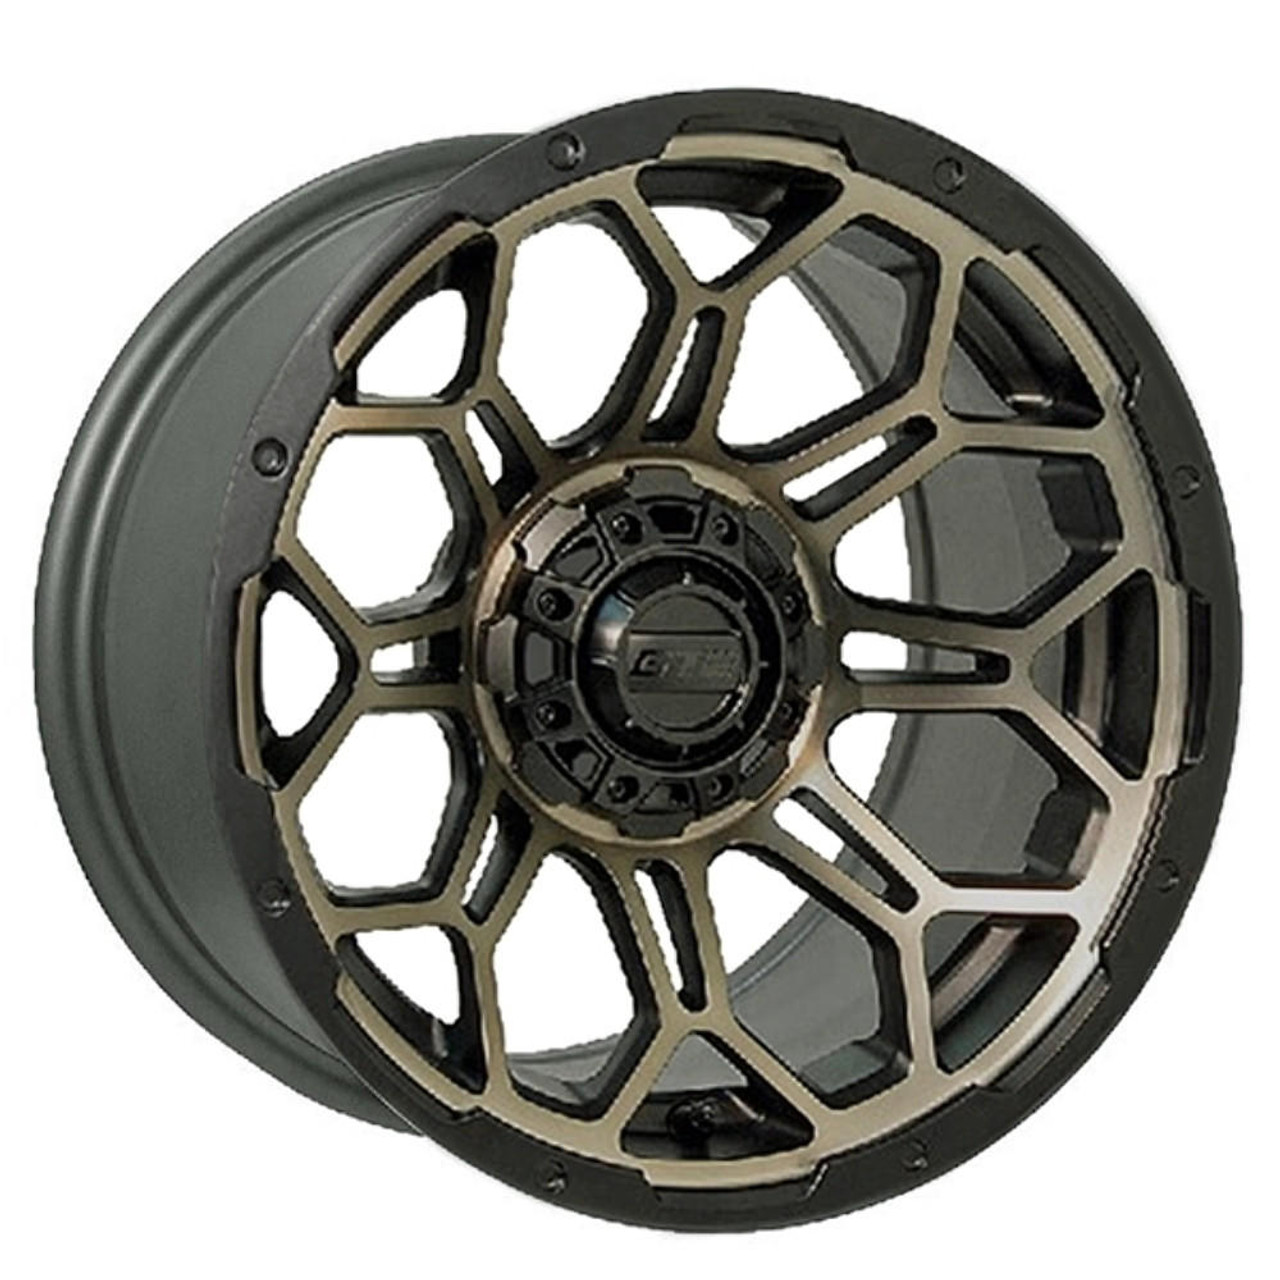  GTW 14" BRAVO Matte Bronze-Tint Wheels with Choice of Off-Road Tires - (Set of 4) 